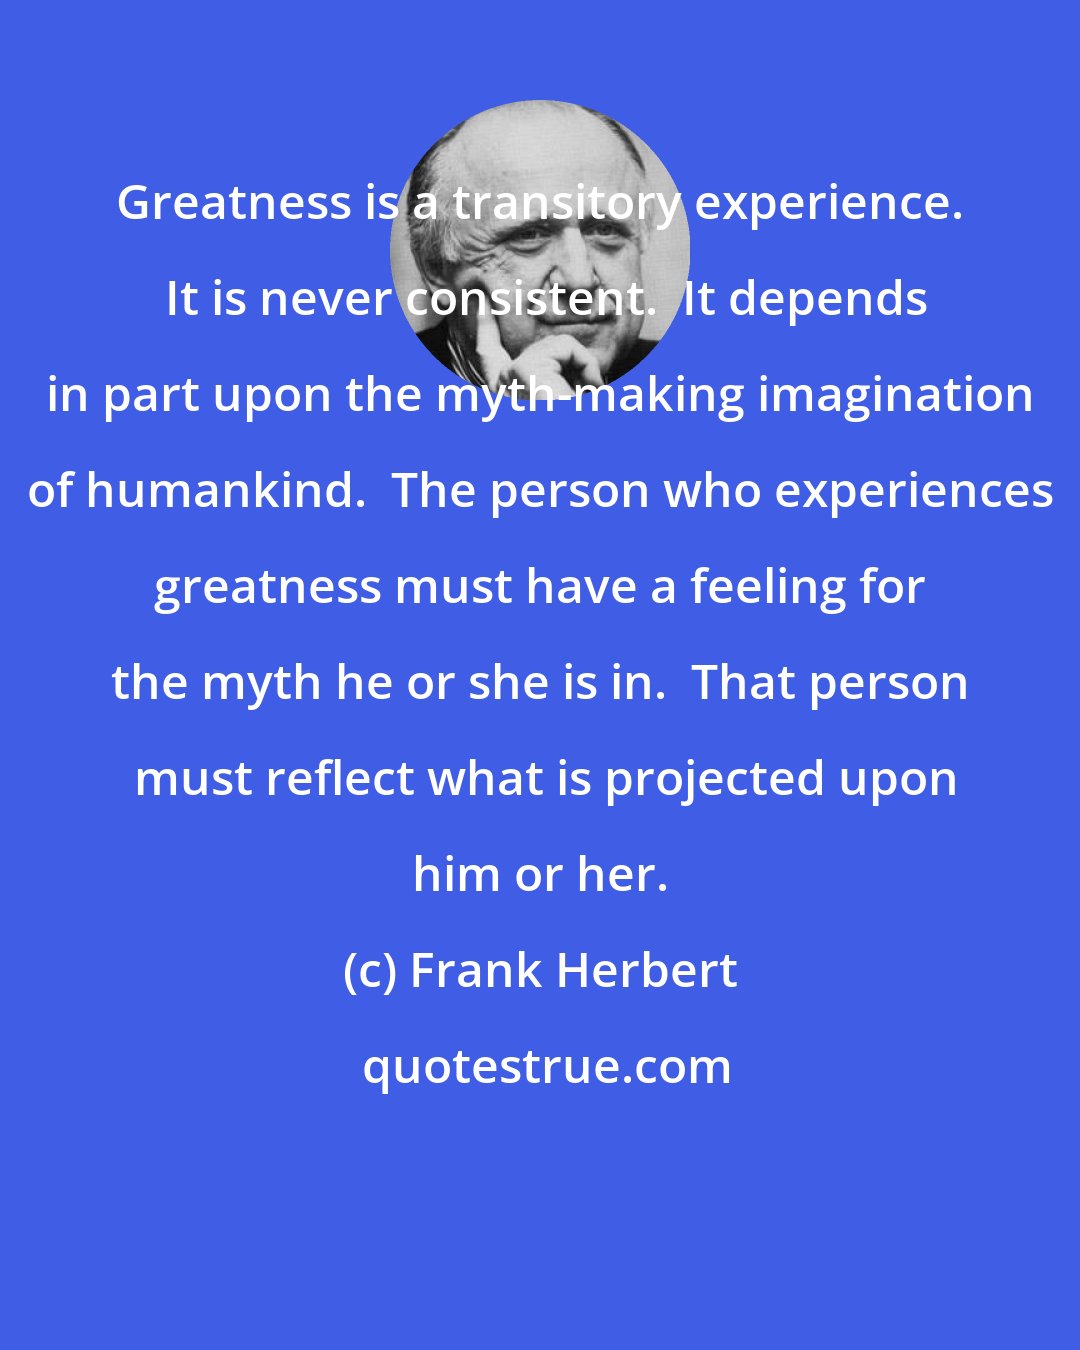 Frank Herbert: Greatness is a transitory experience.  It is never consistent.  It depends in part upon the myth-making imagination of humankind.  The person who experiences greatness must have a feeling for the myth he or she is in.  That person  must reflect what is projected upon him or her.